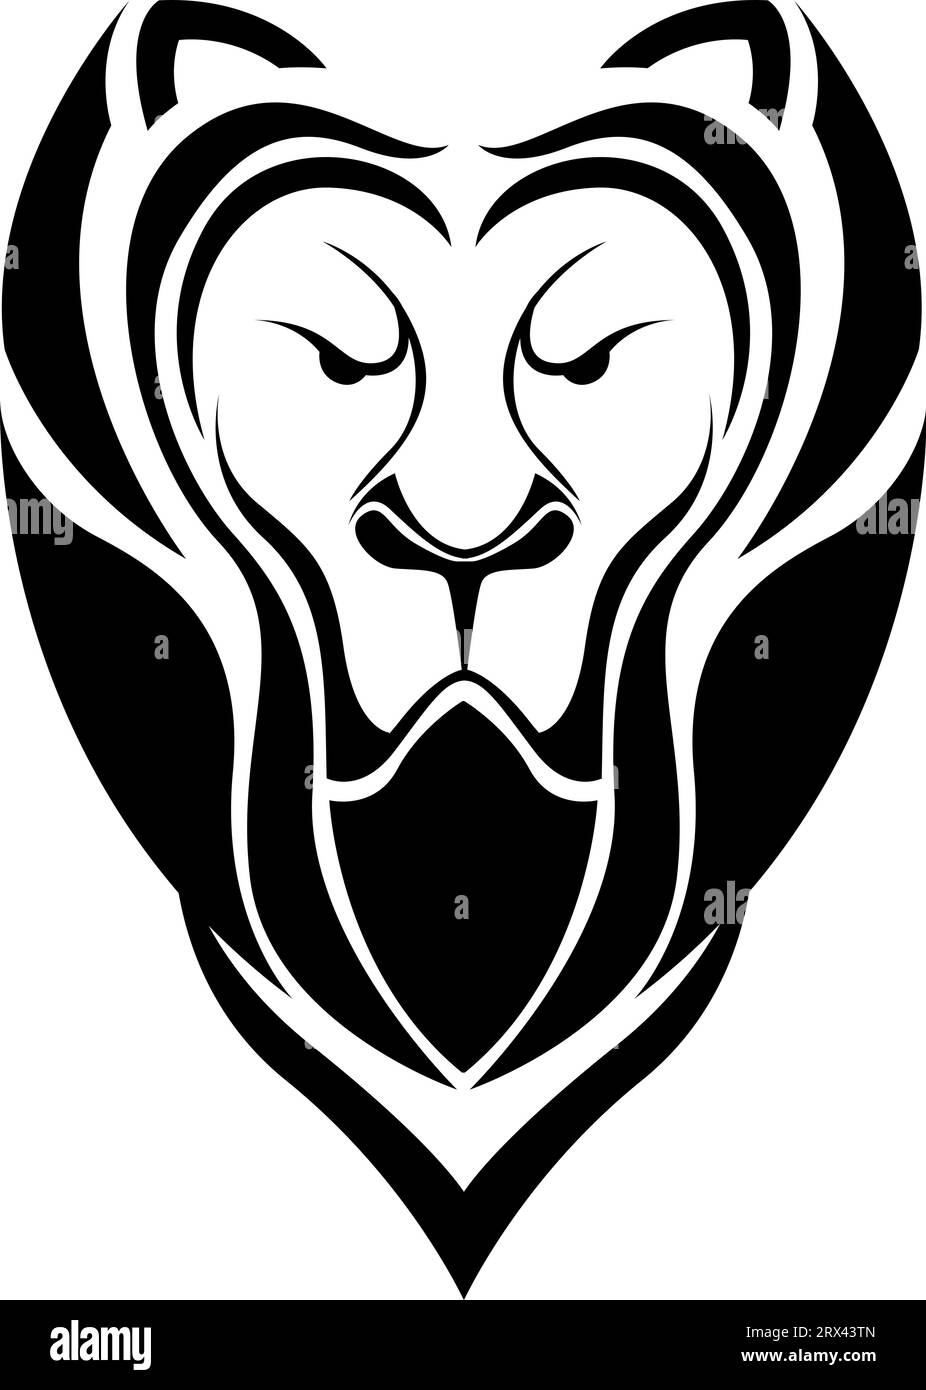 Lion king tattoo, tattoo illustration, vector on a white background. Stock Vector